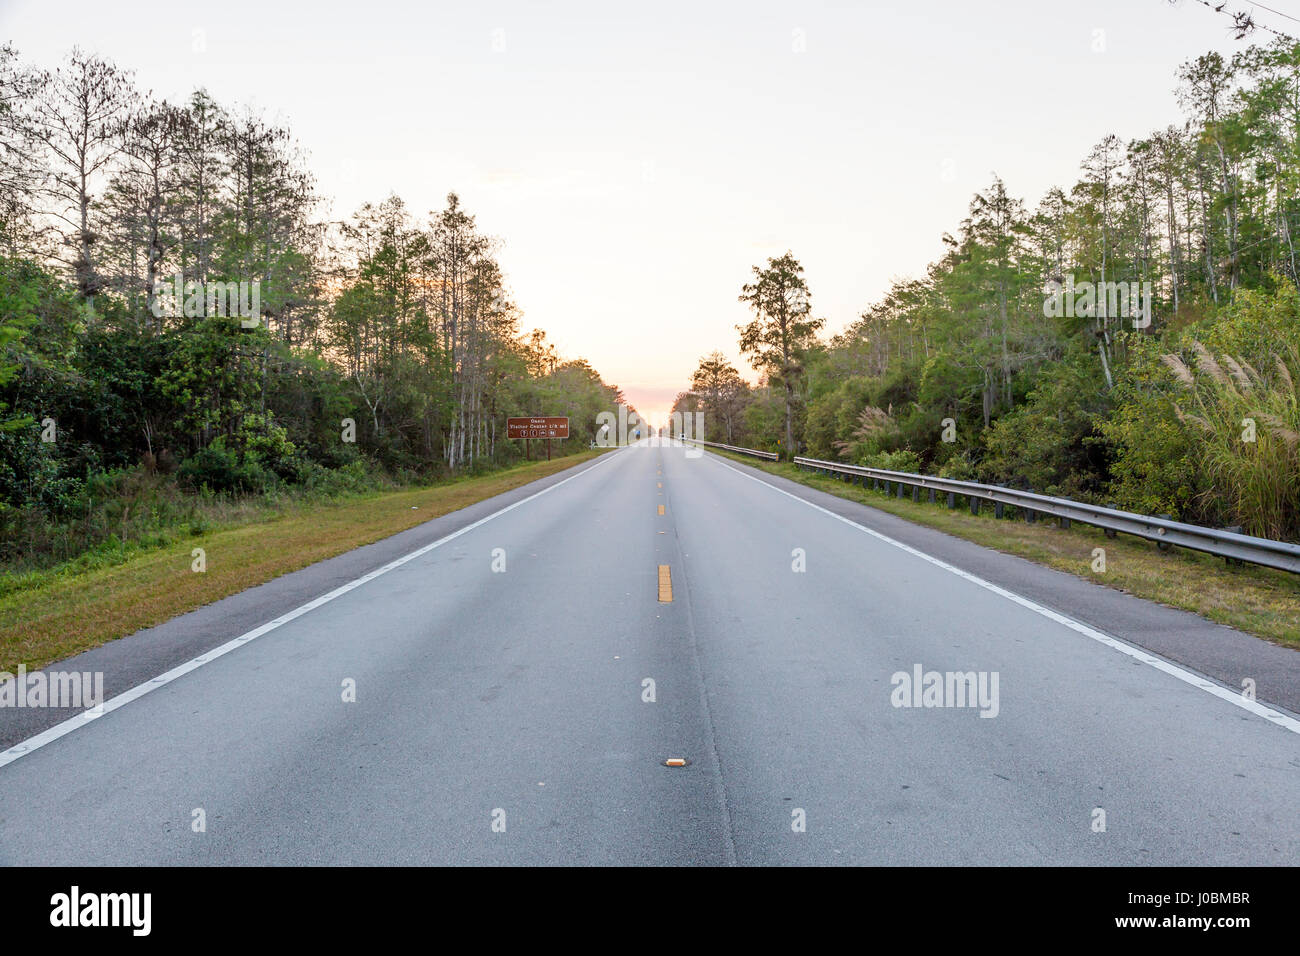 Tamiami Trail scenic highway US 41 view at the sunset. Florida, United States Stock Photo